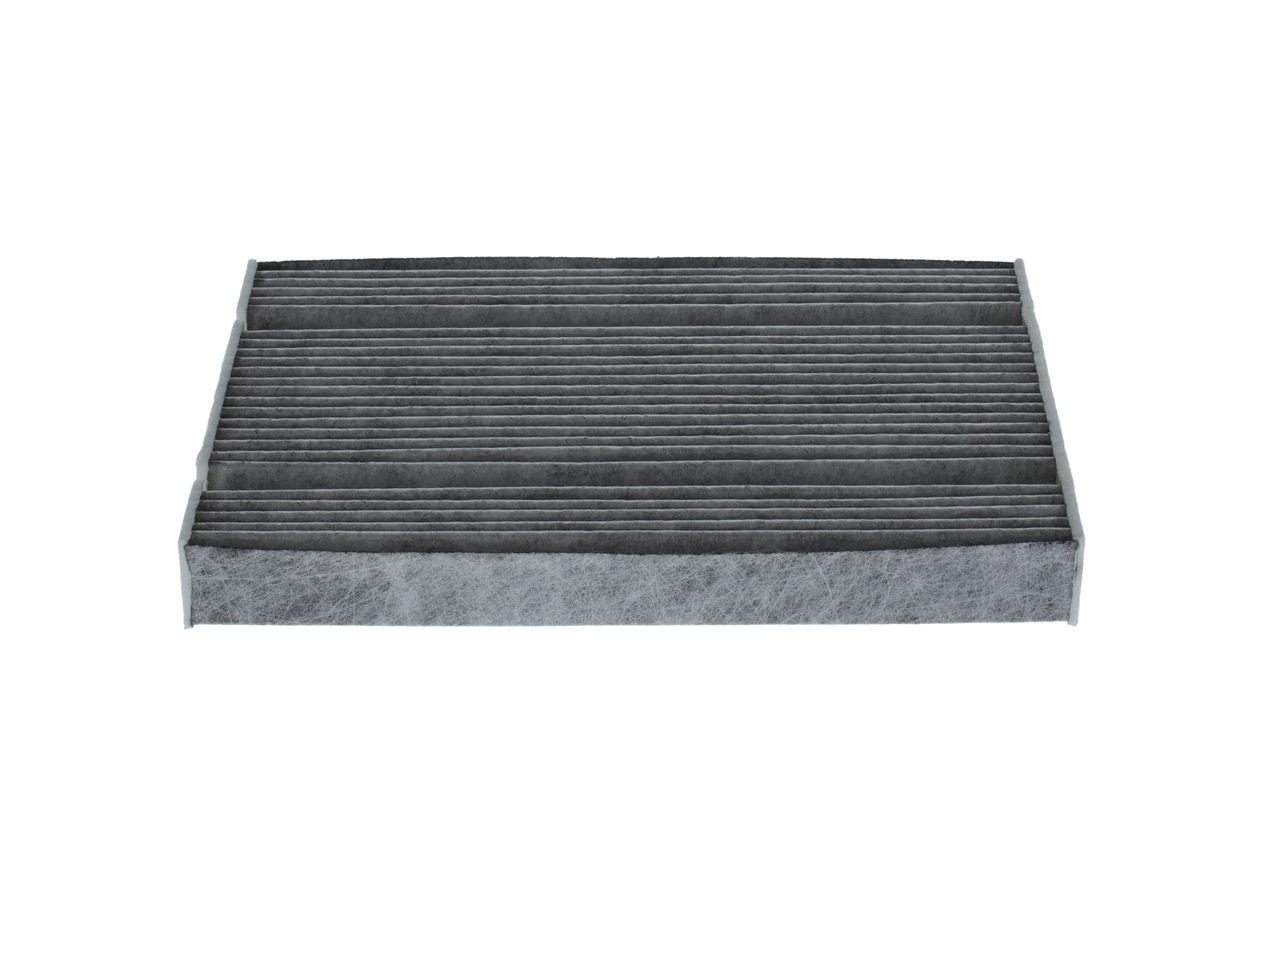 1987435628 Air con filter R 5628 BOSCH Activated Carbon Filter, 206 mm x 300 mm x 36 mm